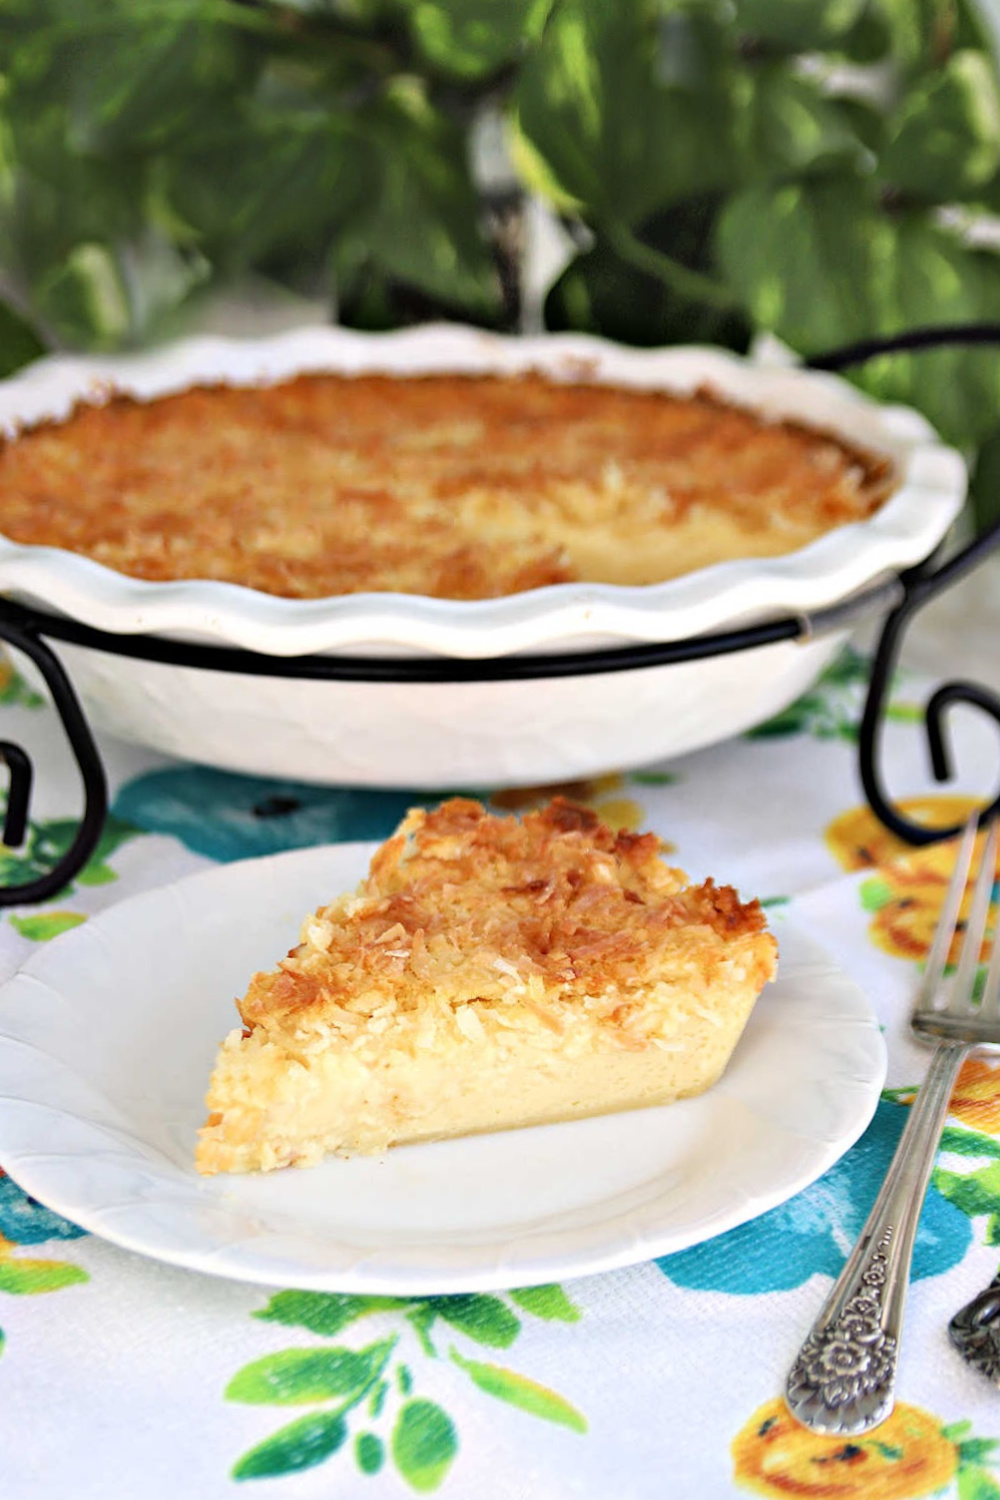 Super easy recipe that is delicious and always a favorite. Creamy Impossible Coconut Custard pie creates its own crust and takes just a few minutes to prepare. Add ingredients to a blender, pour into a pie pan, top with coconut and bake. It is that easy!